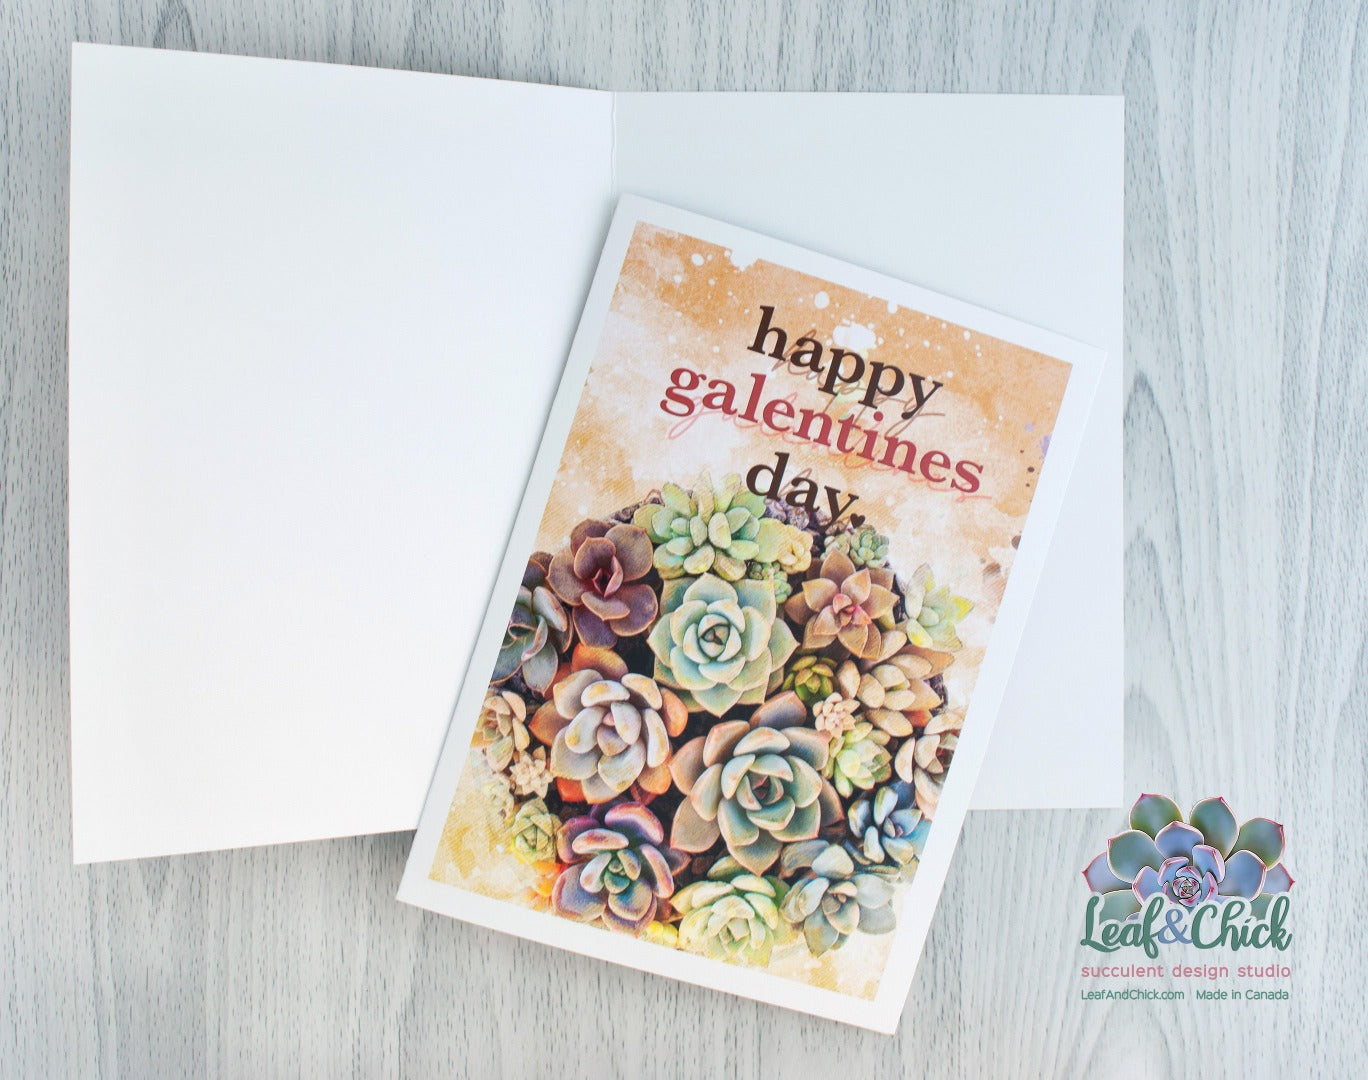 galentines day card art with a blank inside to write your own message